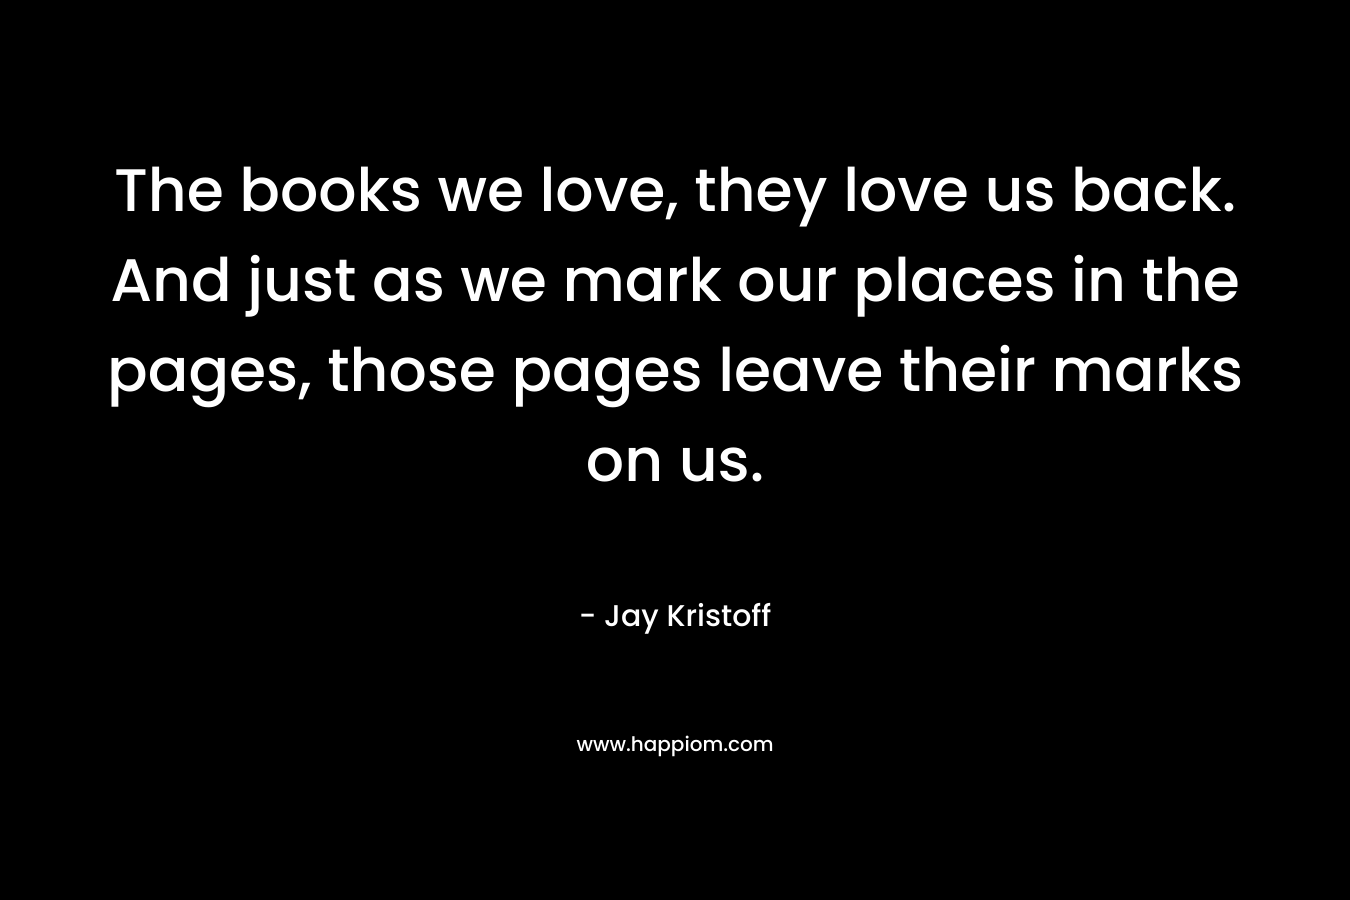 The books we love, they love us back. And just as we mark our places in the pages, those pages leave their marks on us.